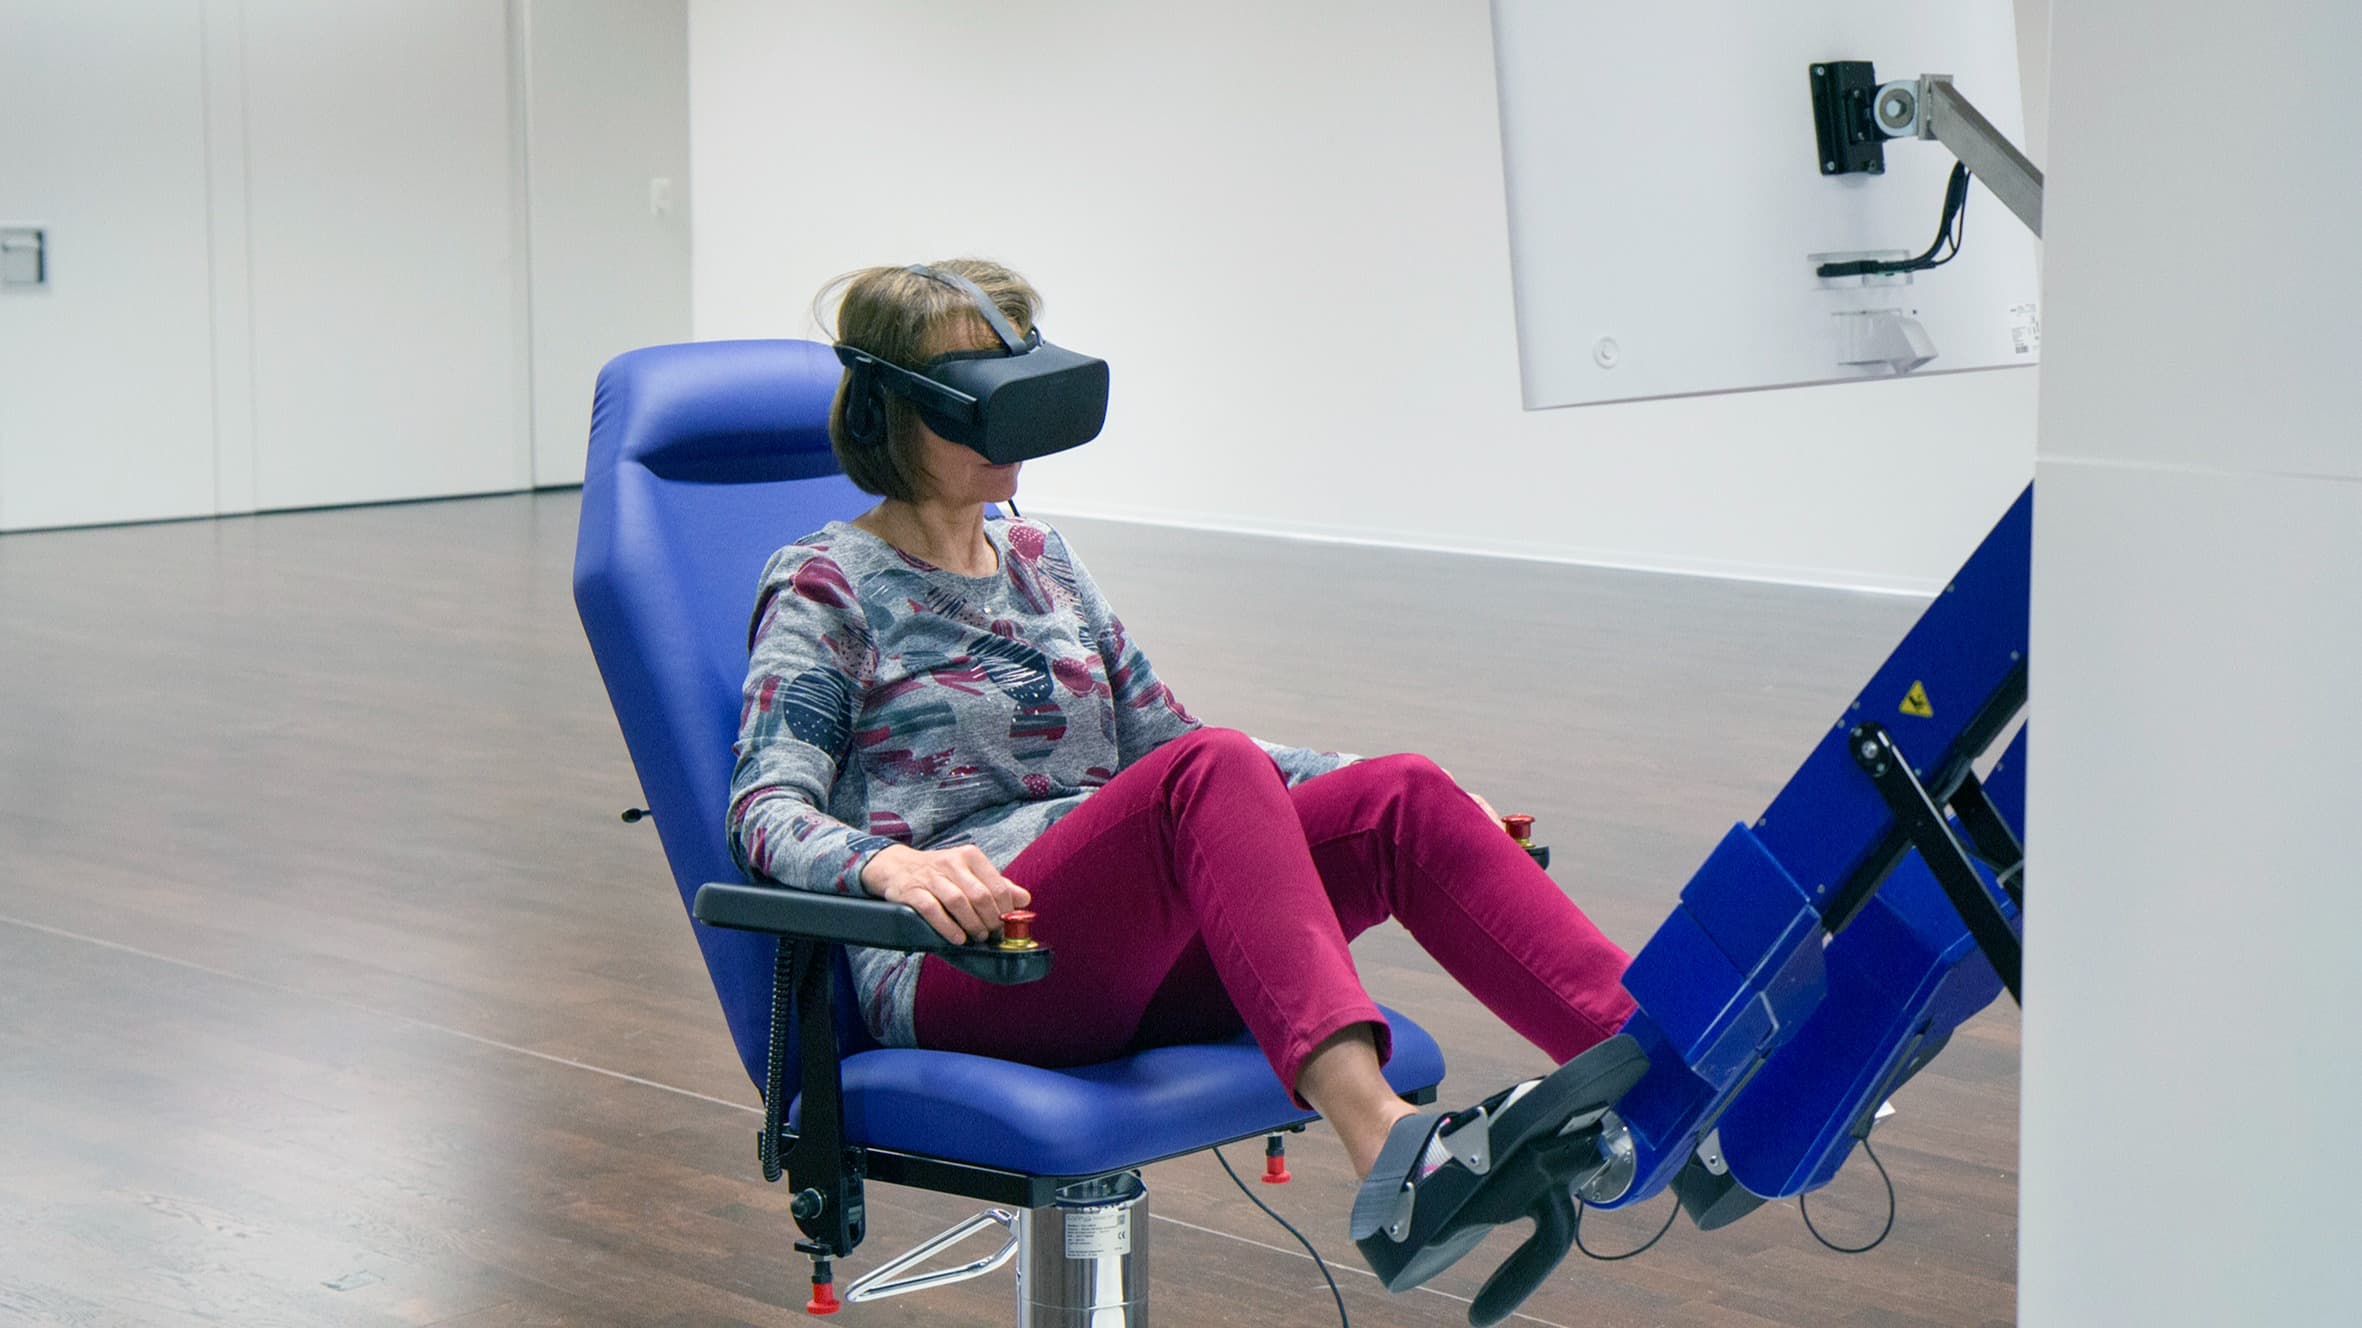 Patients can move around – in virtual worlds